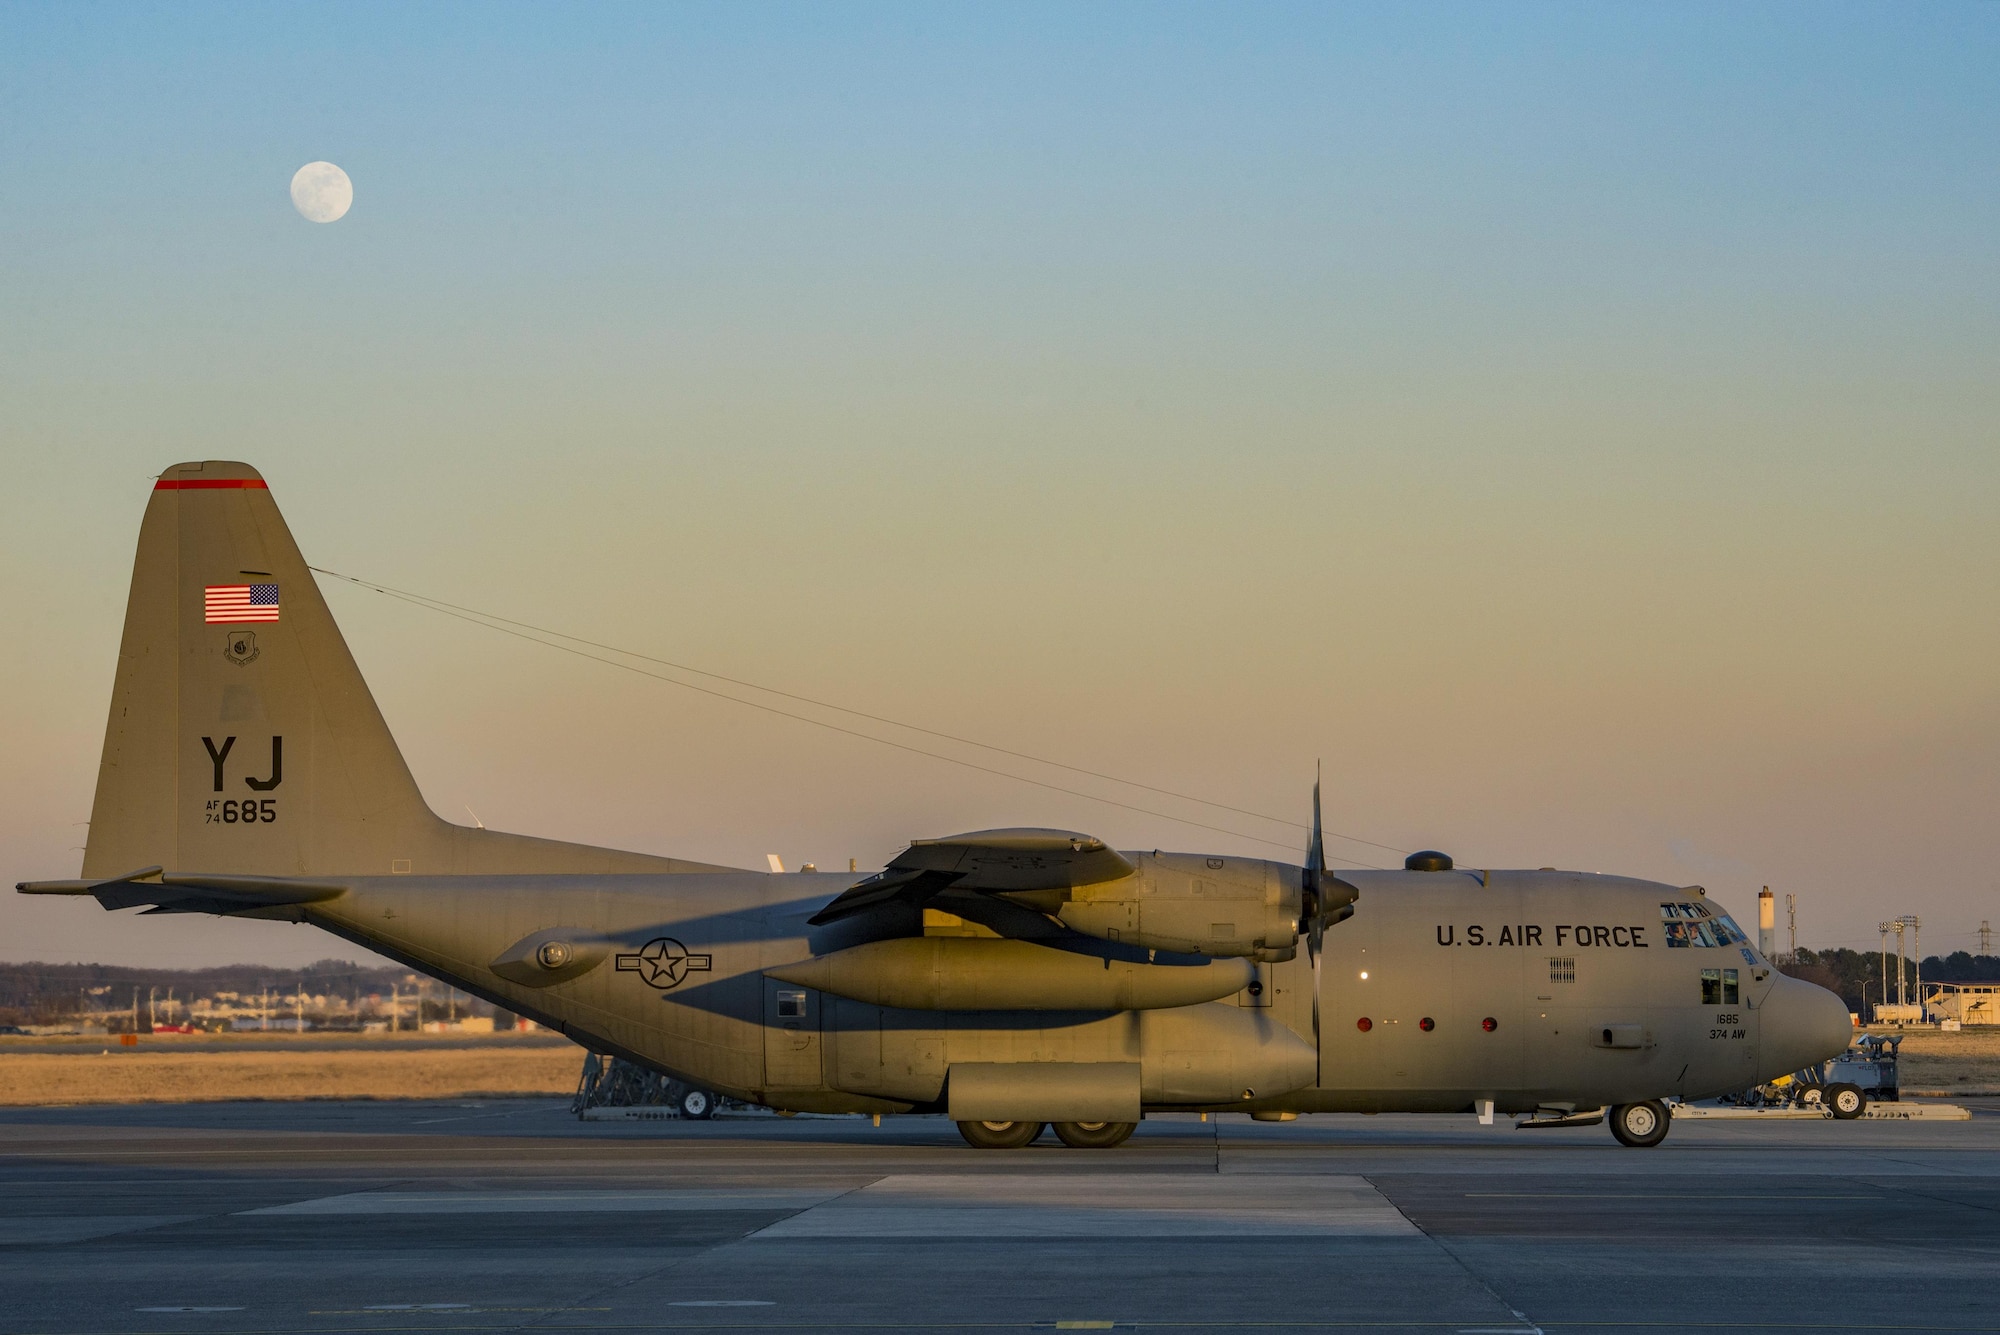 A C-130 Hercules prepares to park on the flight line after a day of personnel static line jump exercises on Jan. 11, 2017, at Yokota Air Base, Japan. Marines work with the 36th Airlift Squadron four times a year to help maintain jump qualifications and promote bilateral training. (U.S. Air Force photo by Airman 1st Class Donald Hudson)